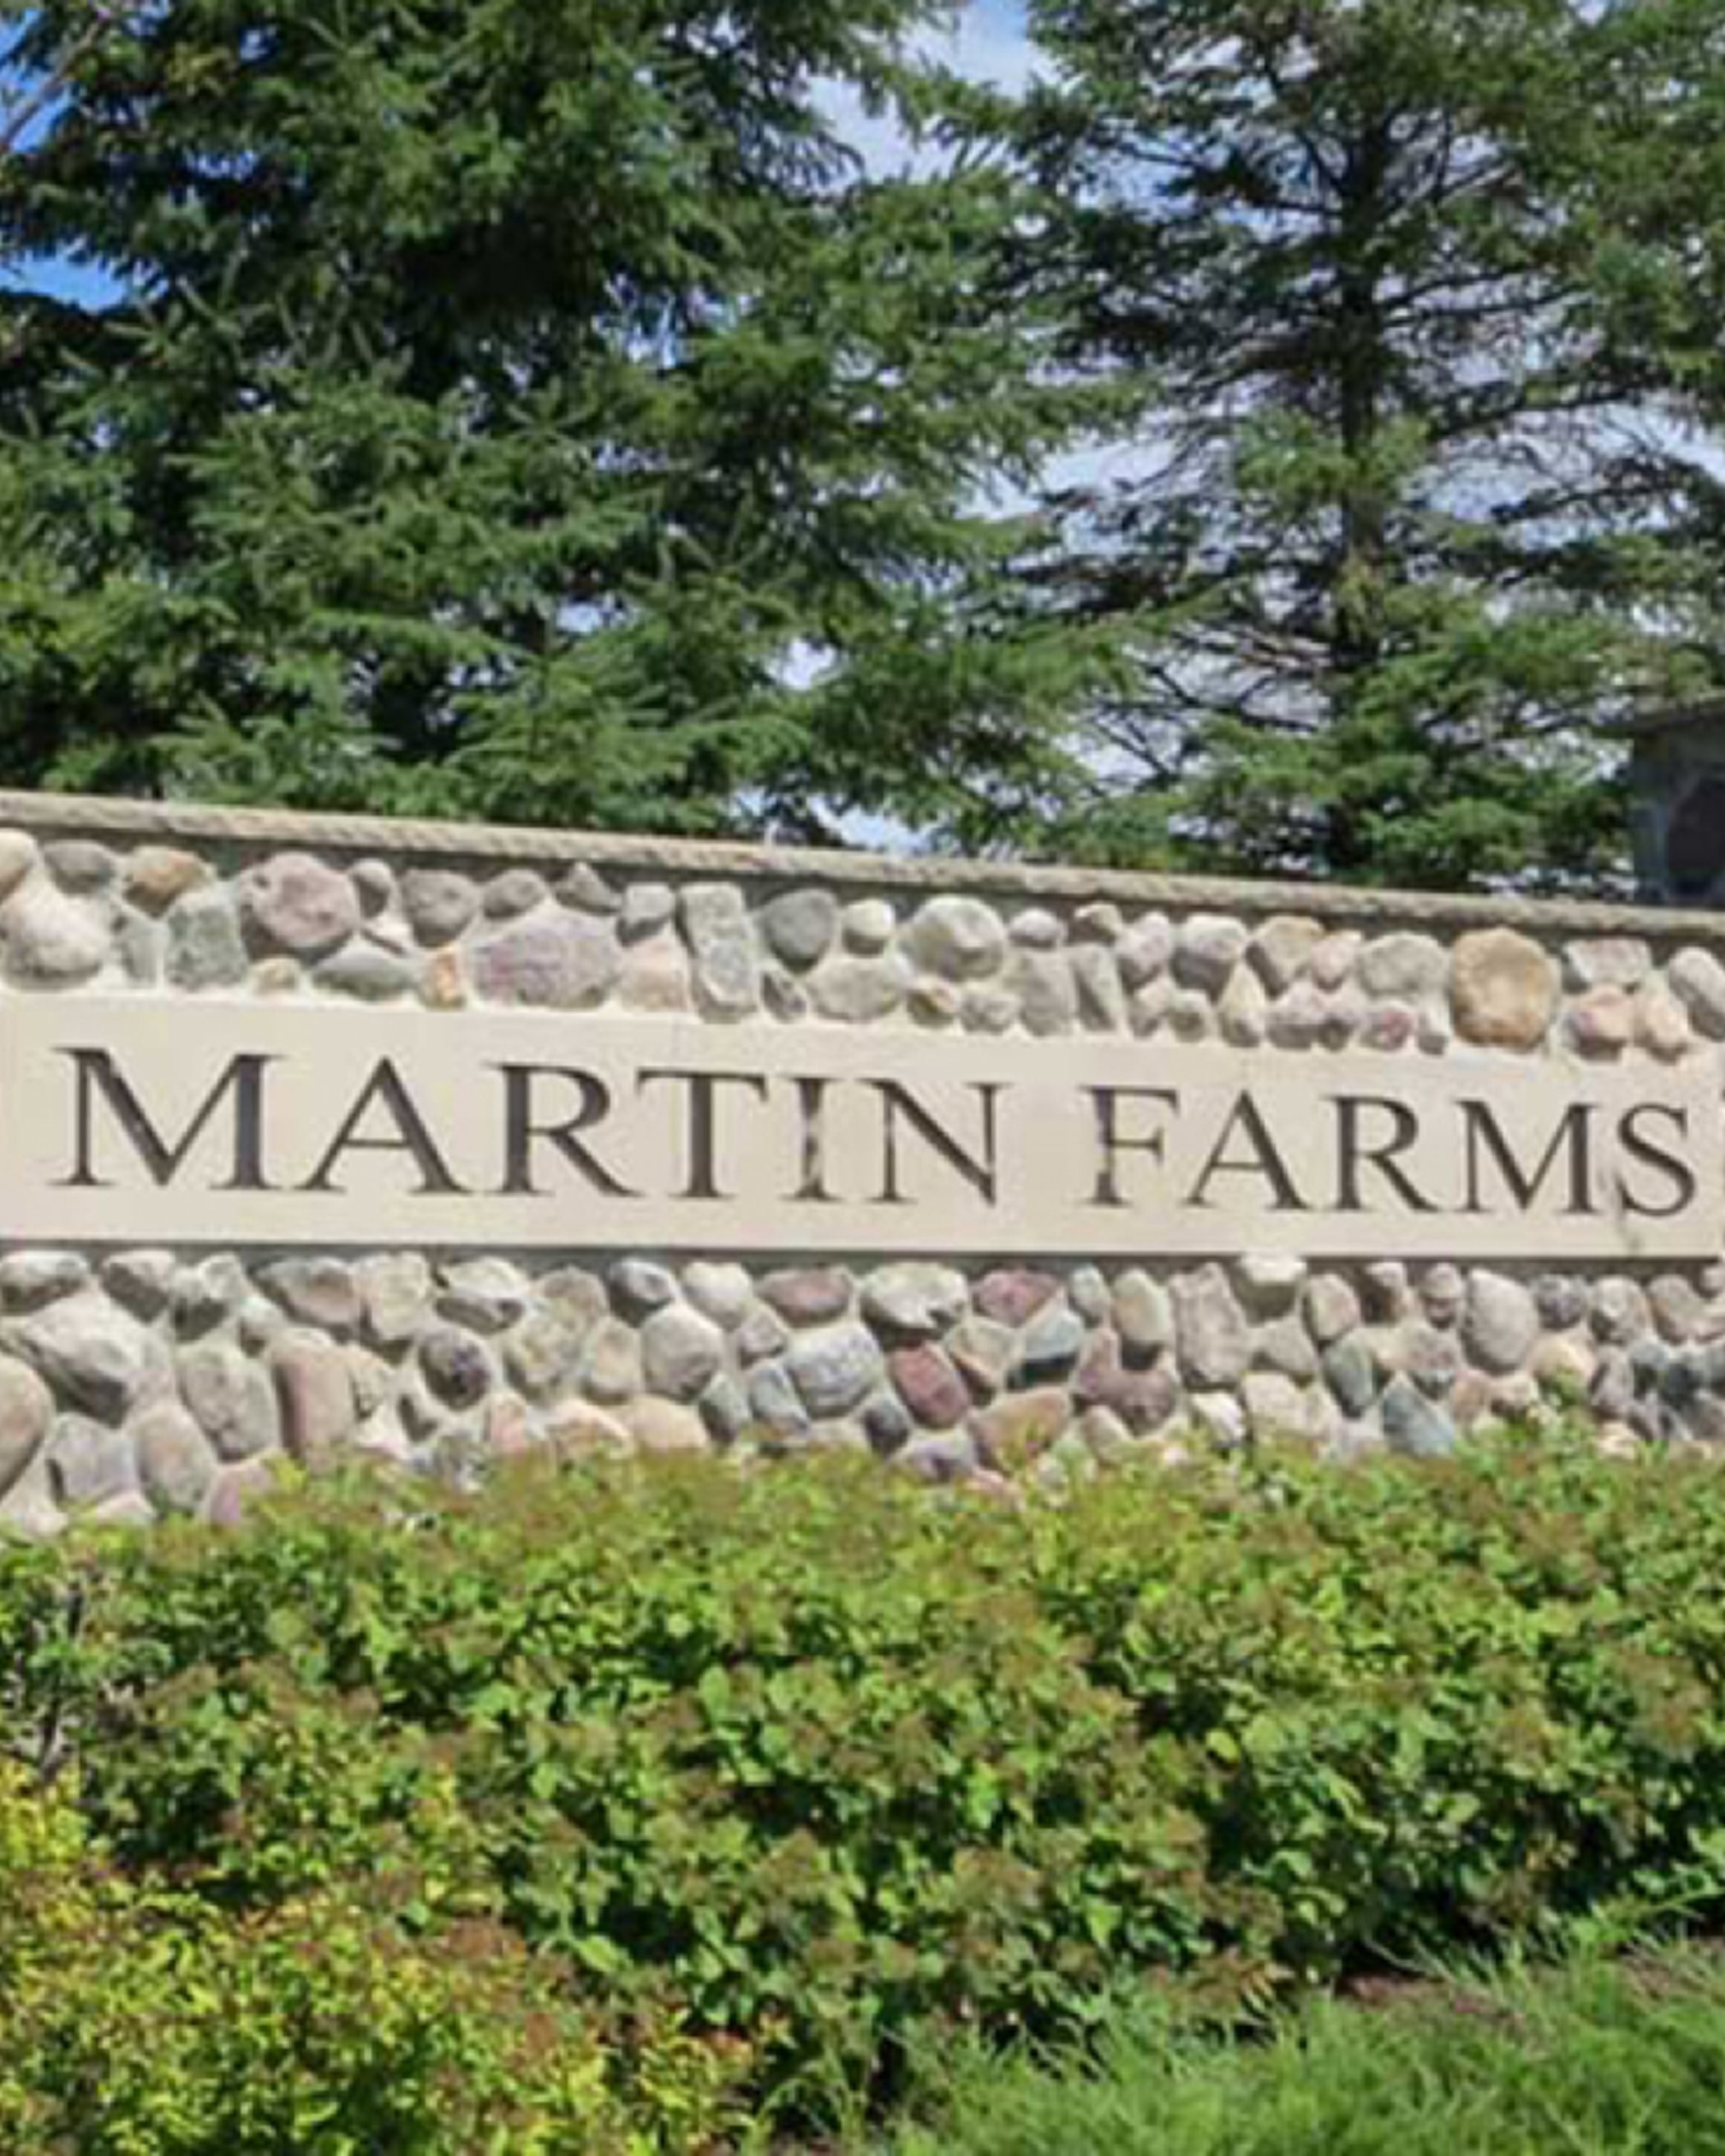 Martin Farms kids can run around and play